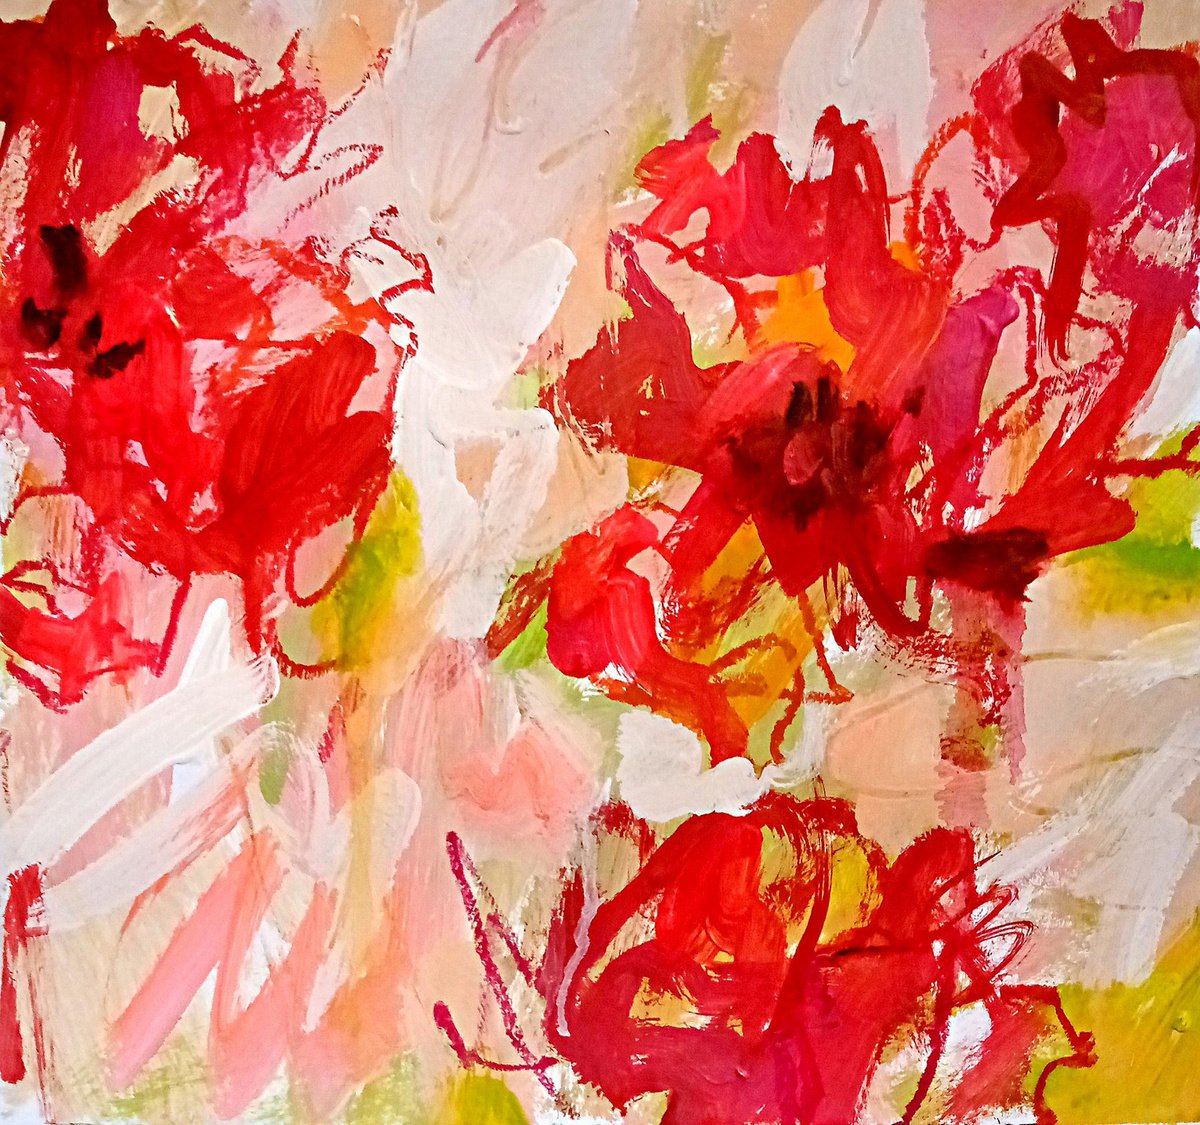 Abstract Red tulips#3/2022 by Valerie Lazareva